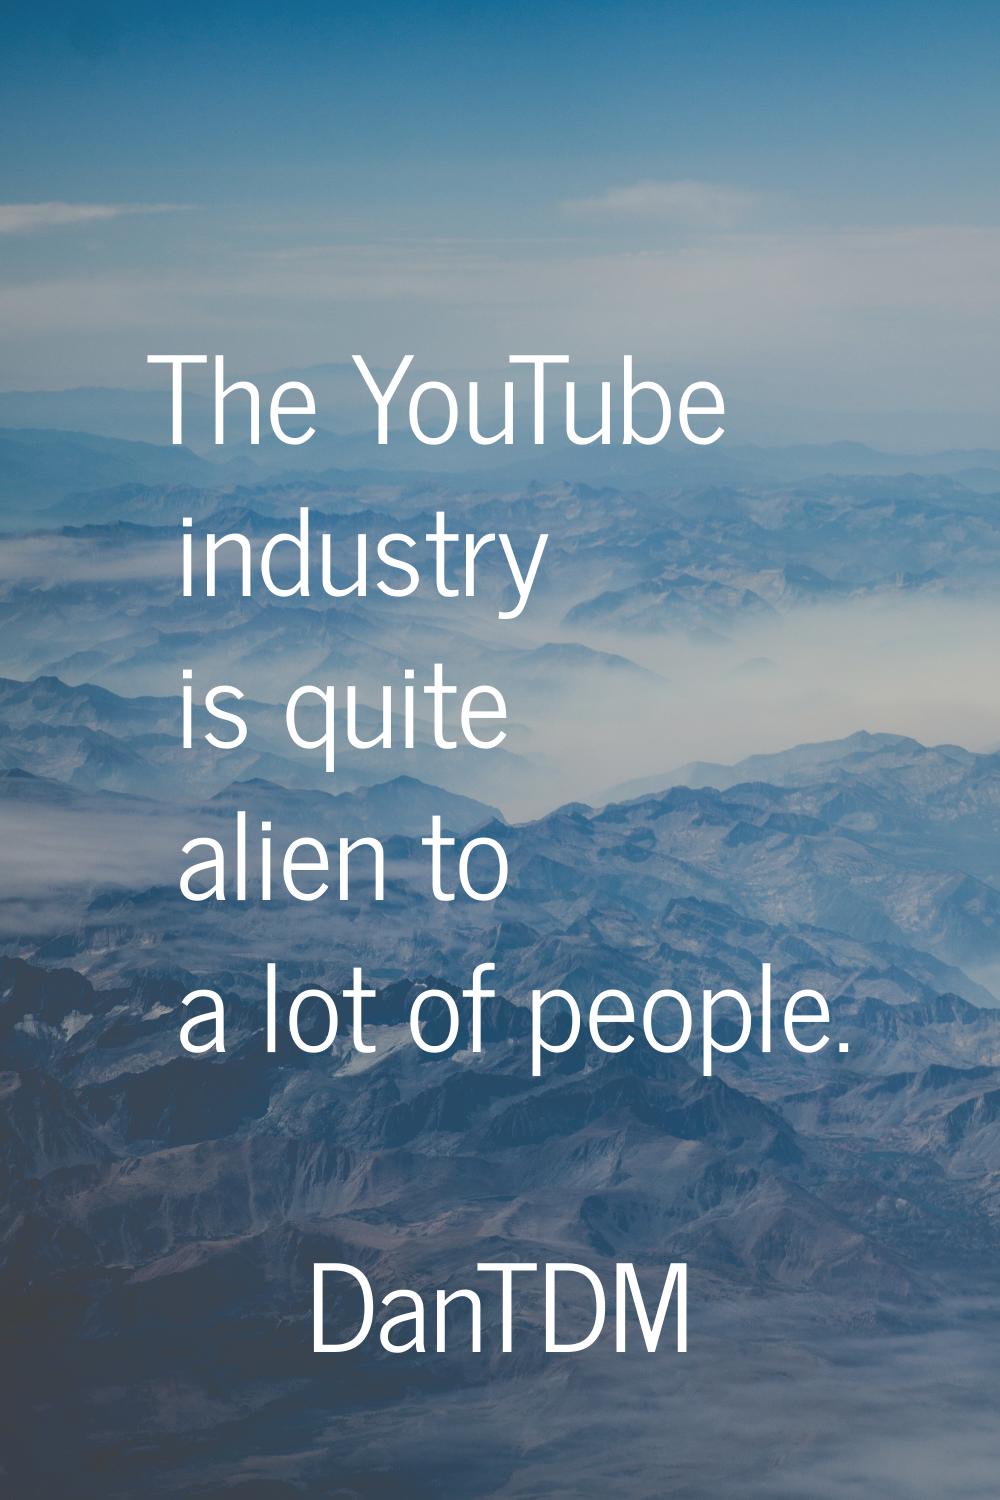 The YouTube industry is quite alien to a lot of people.